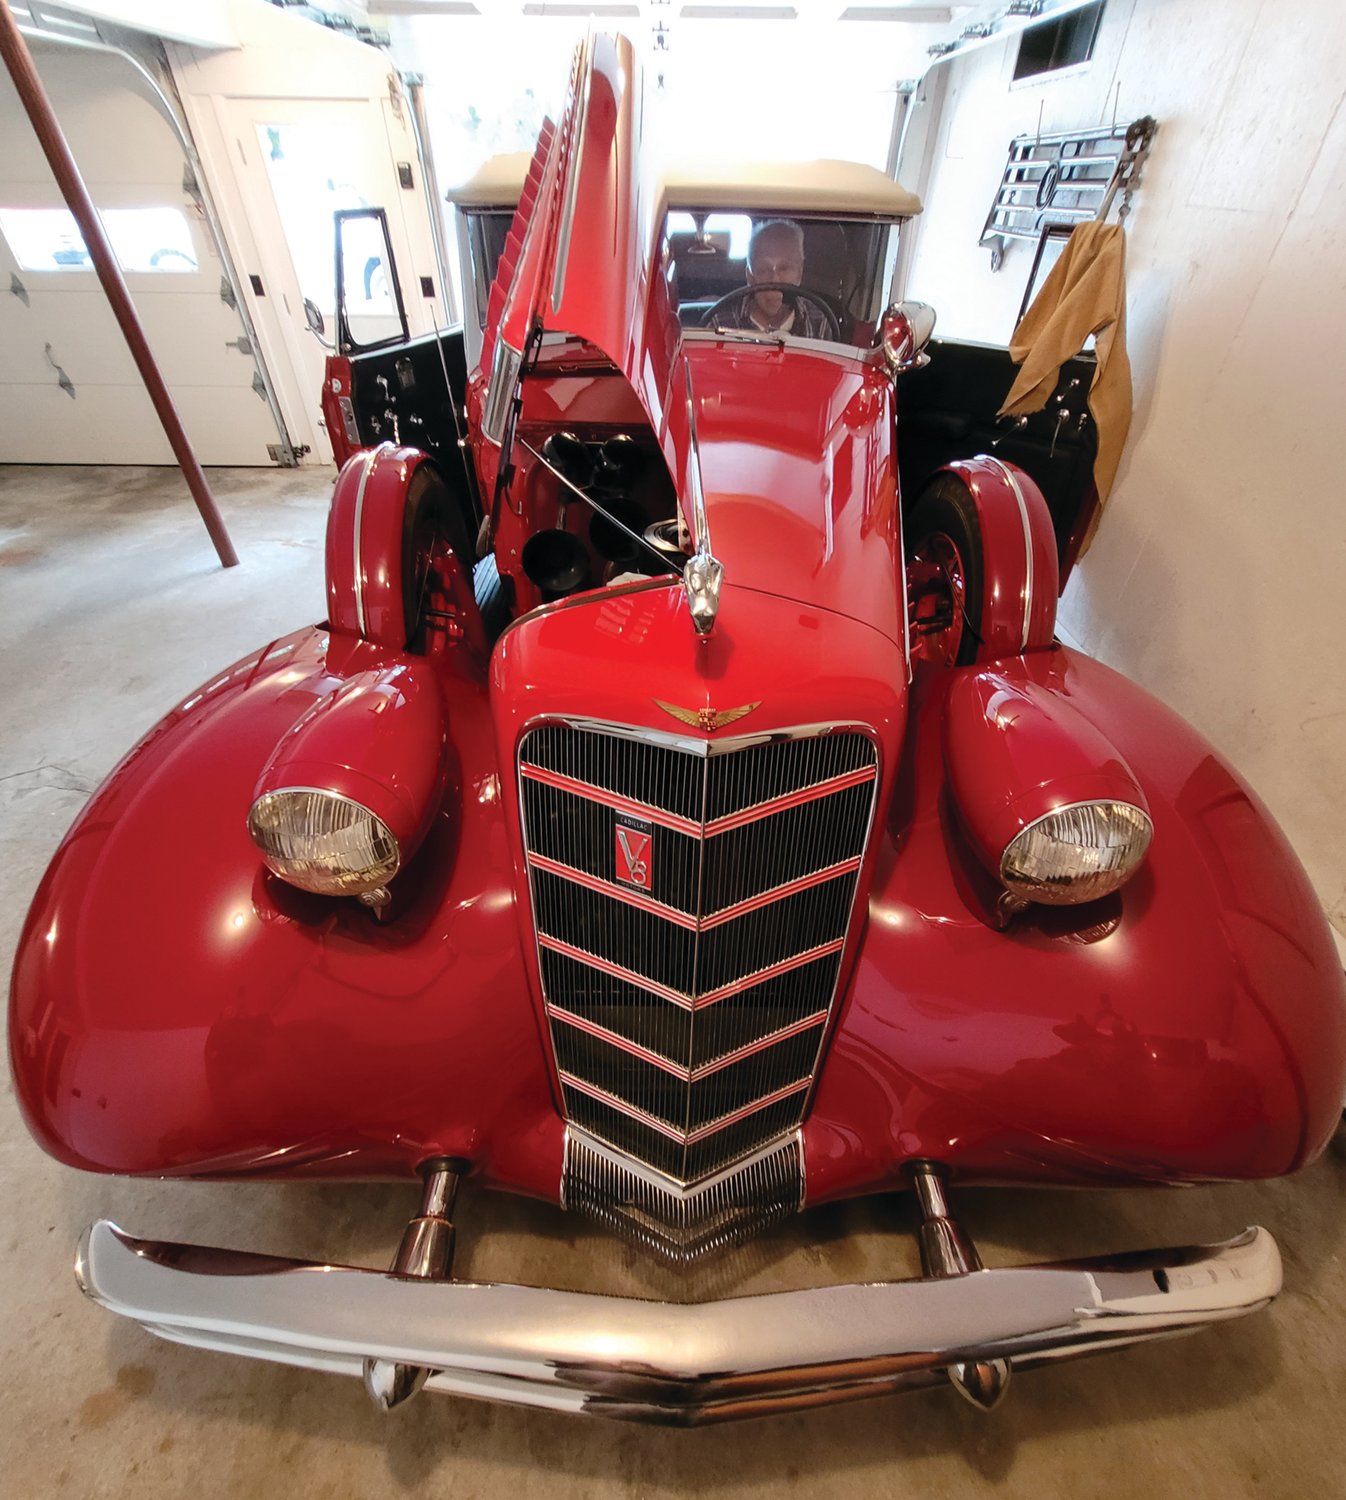 TIME TO CRUISE: John Ricci takes a seat behind the wheel of his 1934 Cadillac. This weekend, he’ll be driving the car that he restored to Newport to compete in the Concours d’Elegance.